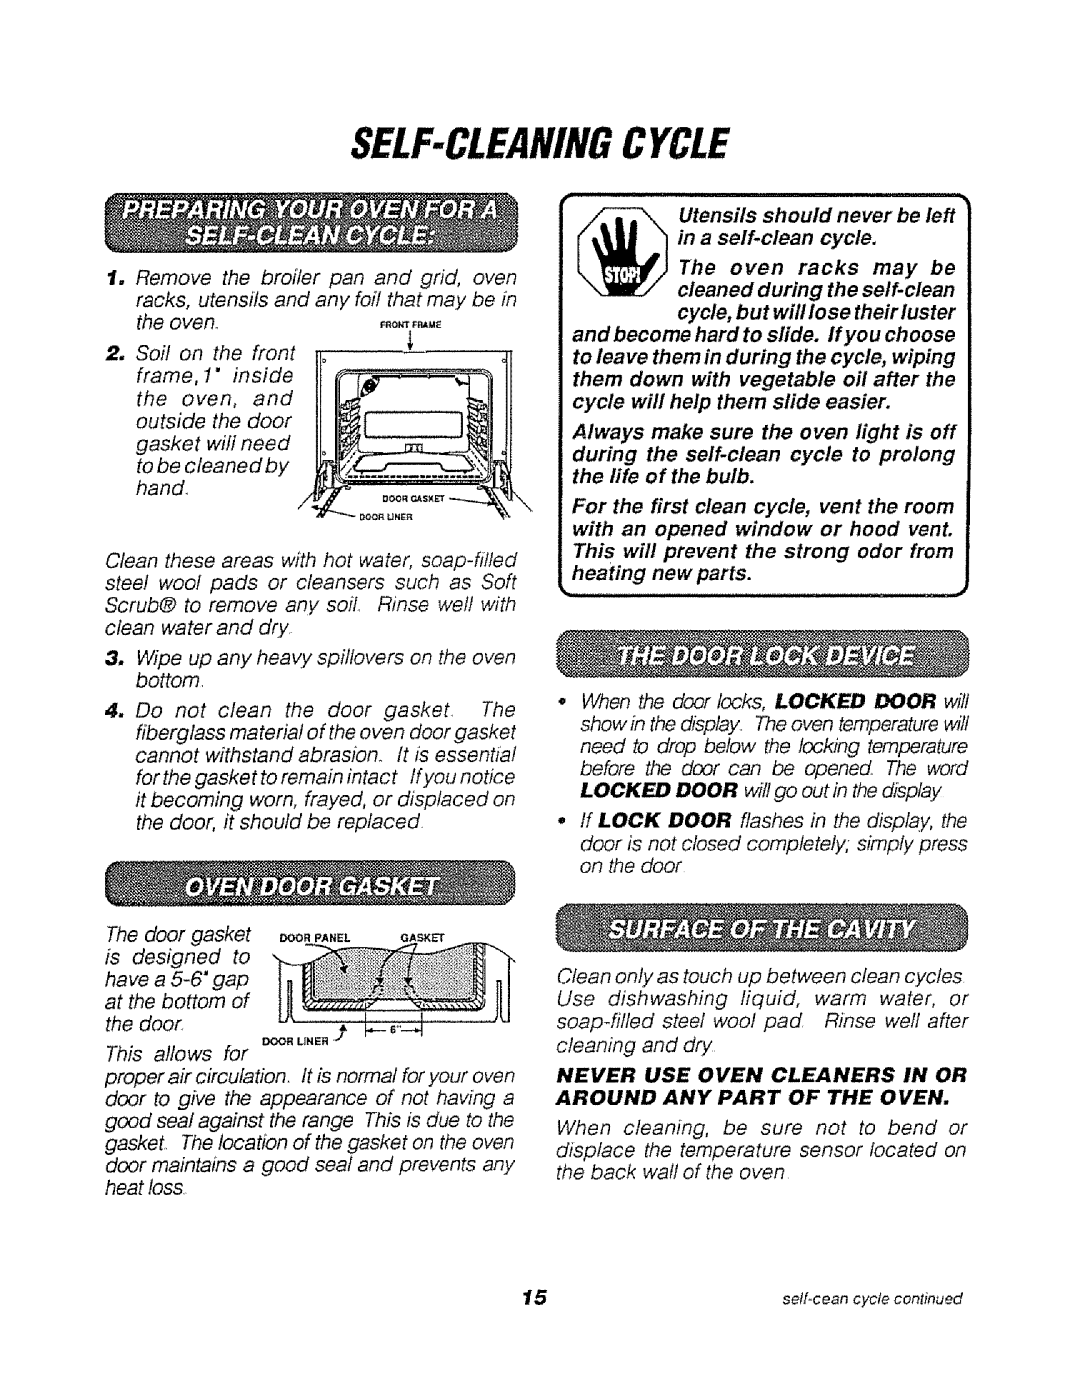 Sears 911.47466, 911.47469, 911.47465 manual Self-Cleaningcycle, Never Use Oven Cleaners In Or, Around Any Part Of The Oven 